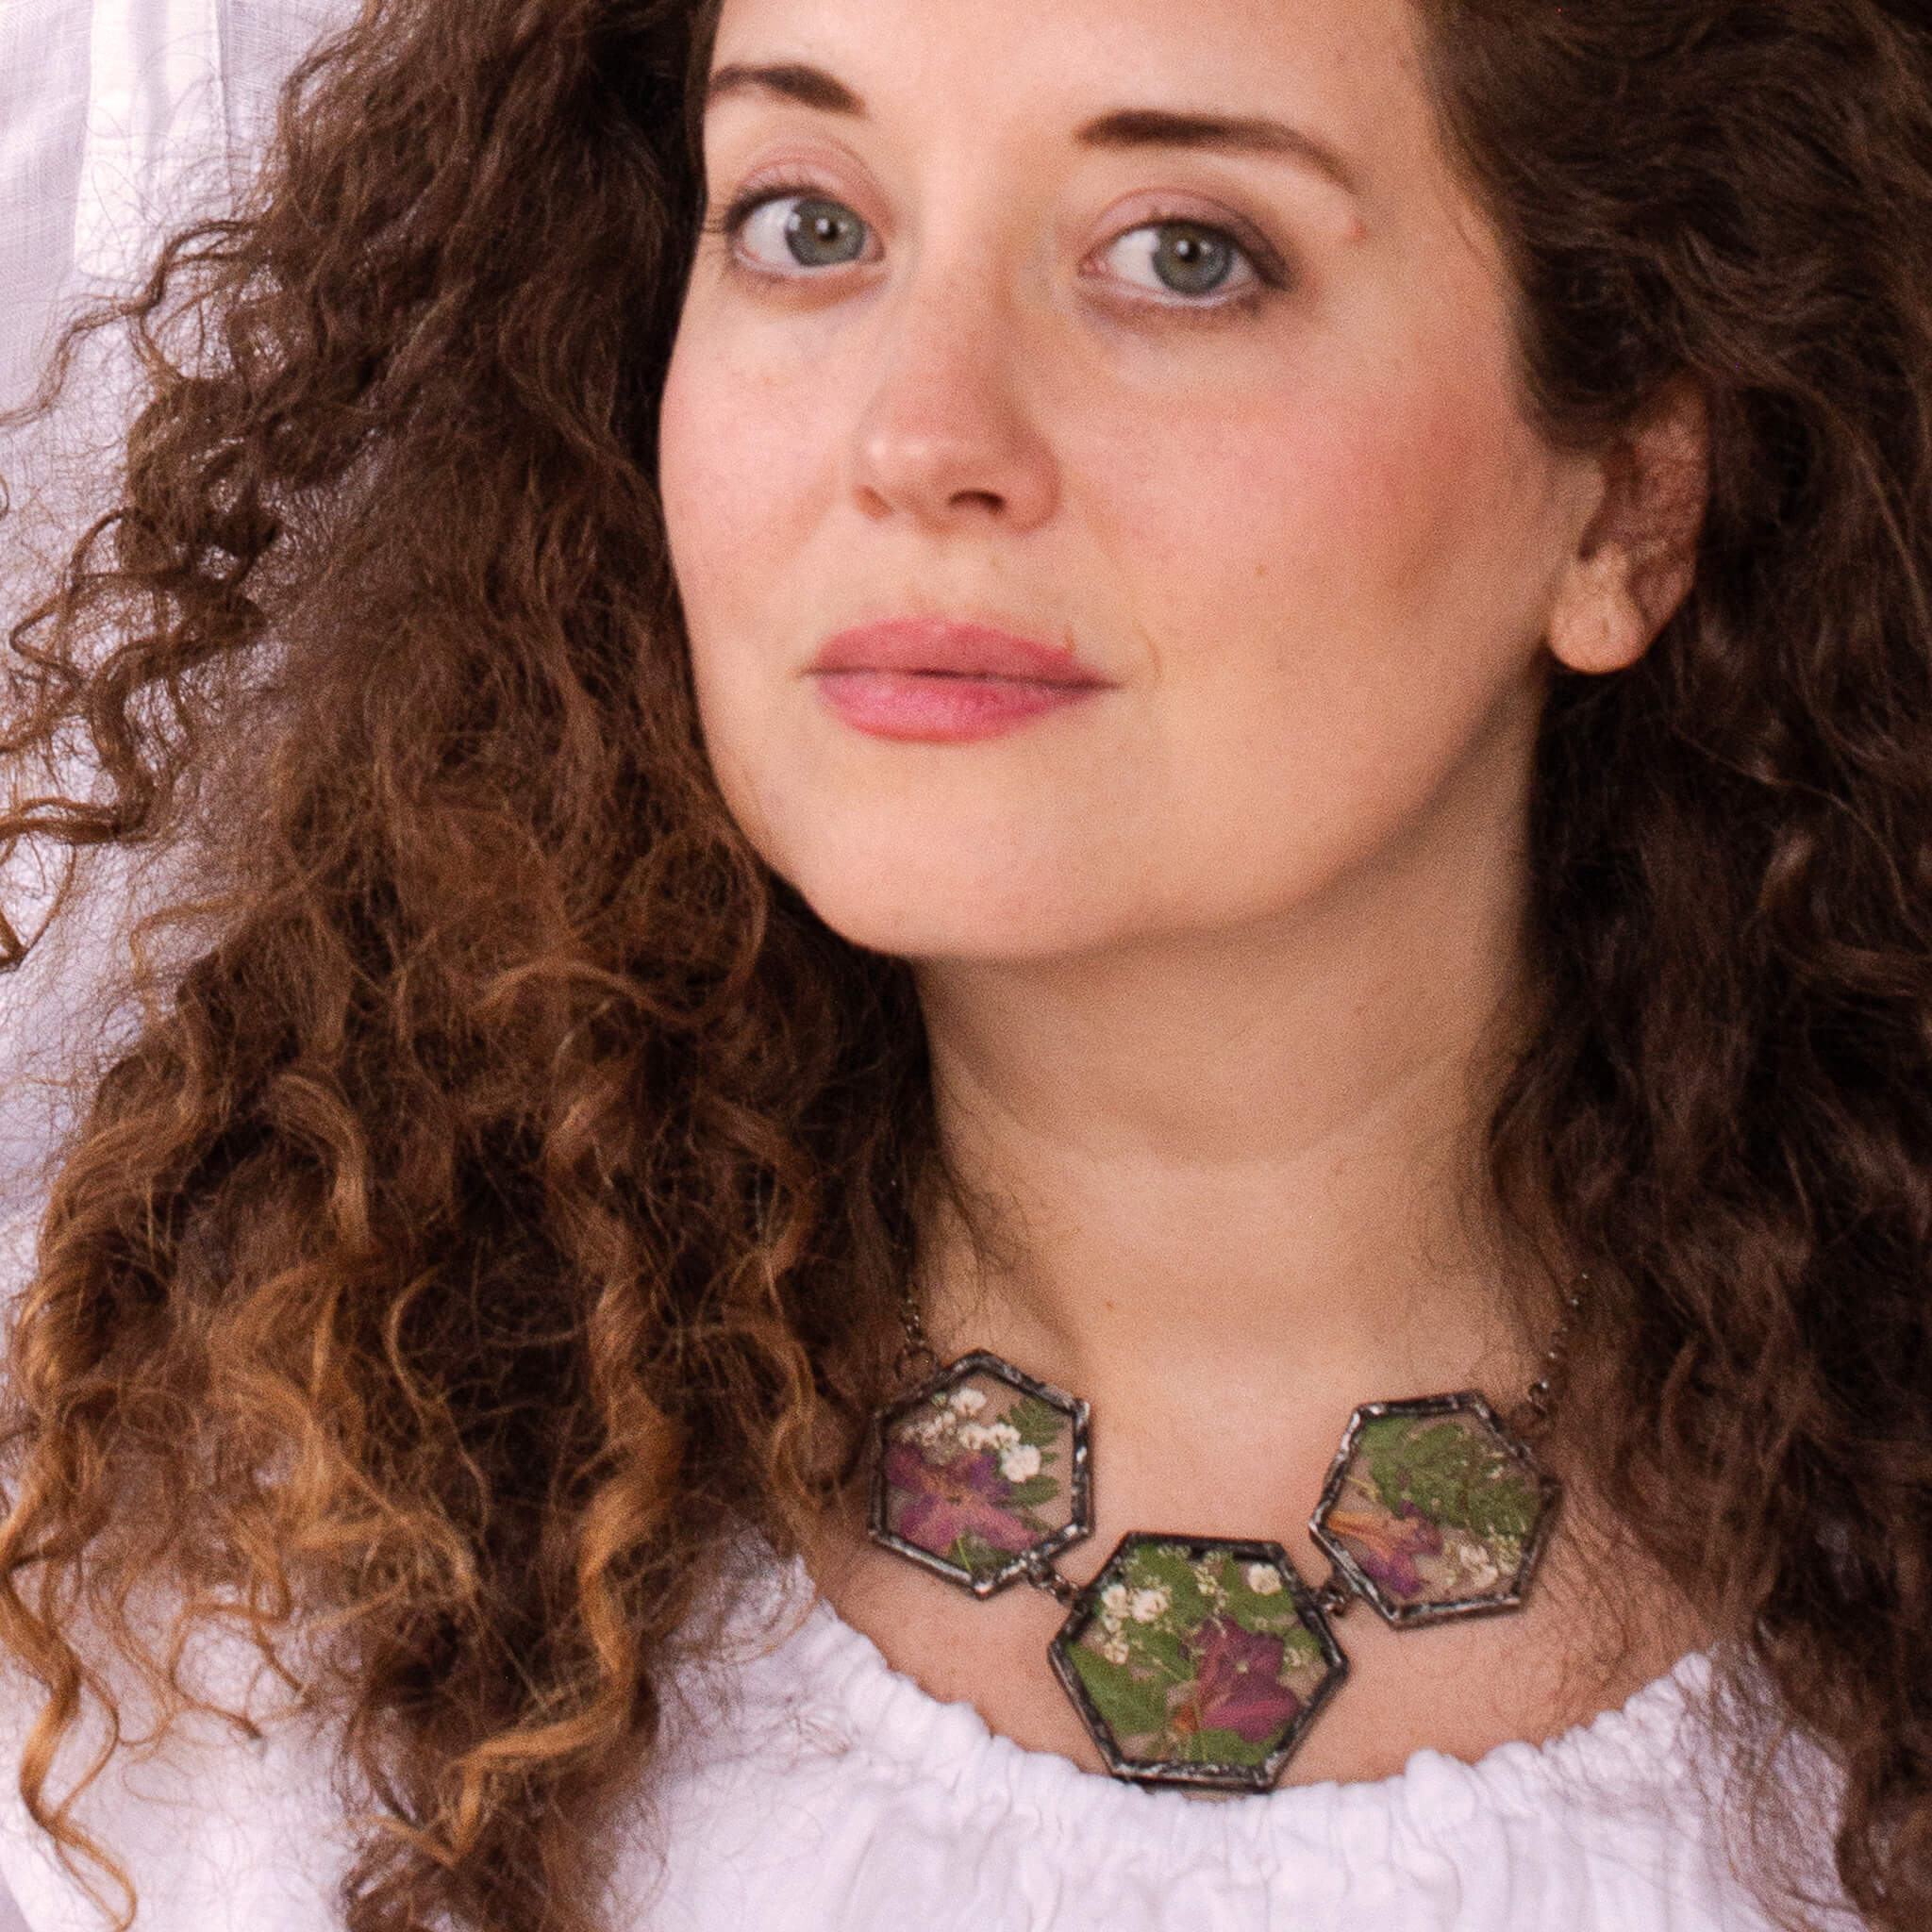 Curly haired brunette in white blouse wearing a statement necklace